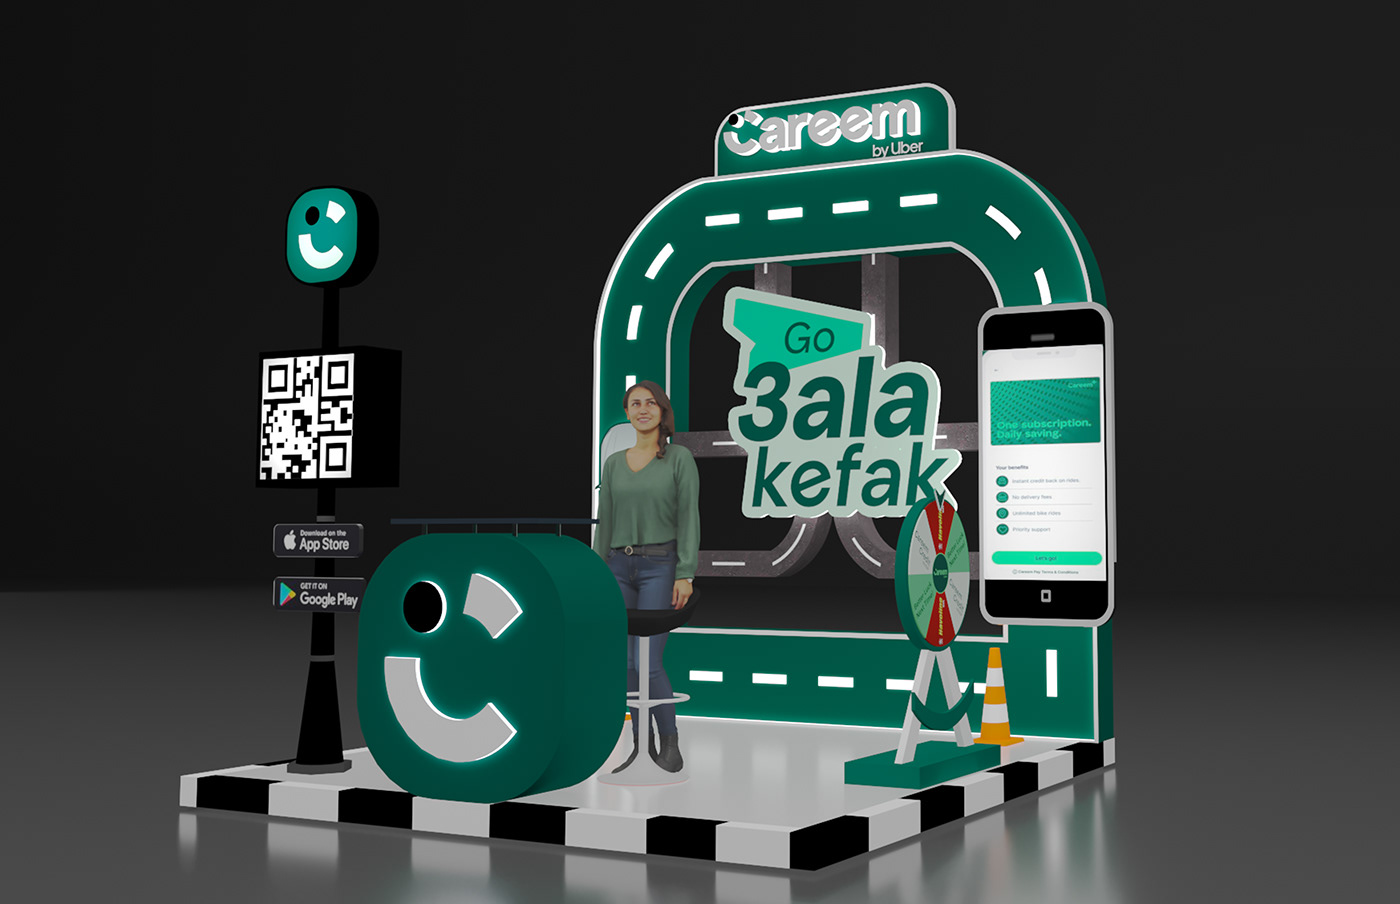 Careem Uber car taxi app booth Exhibition Design  Stand 3D expo